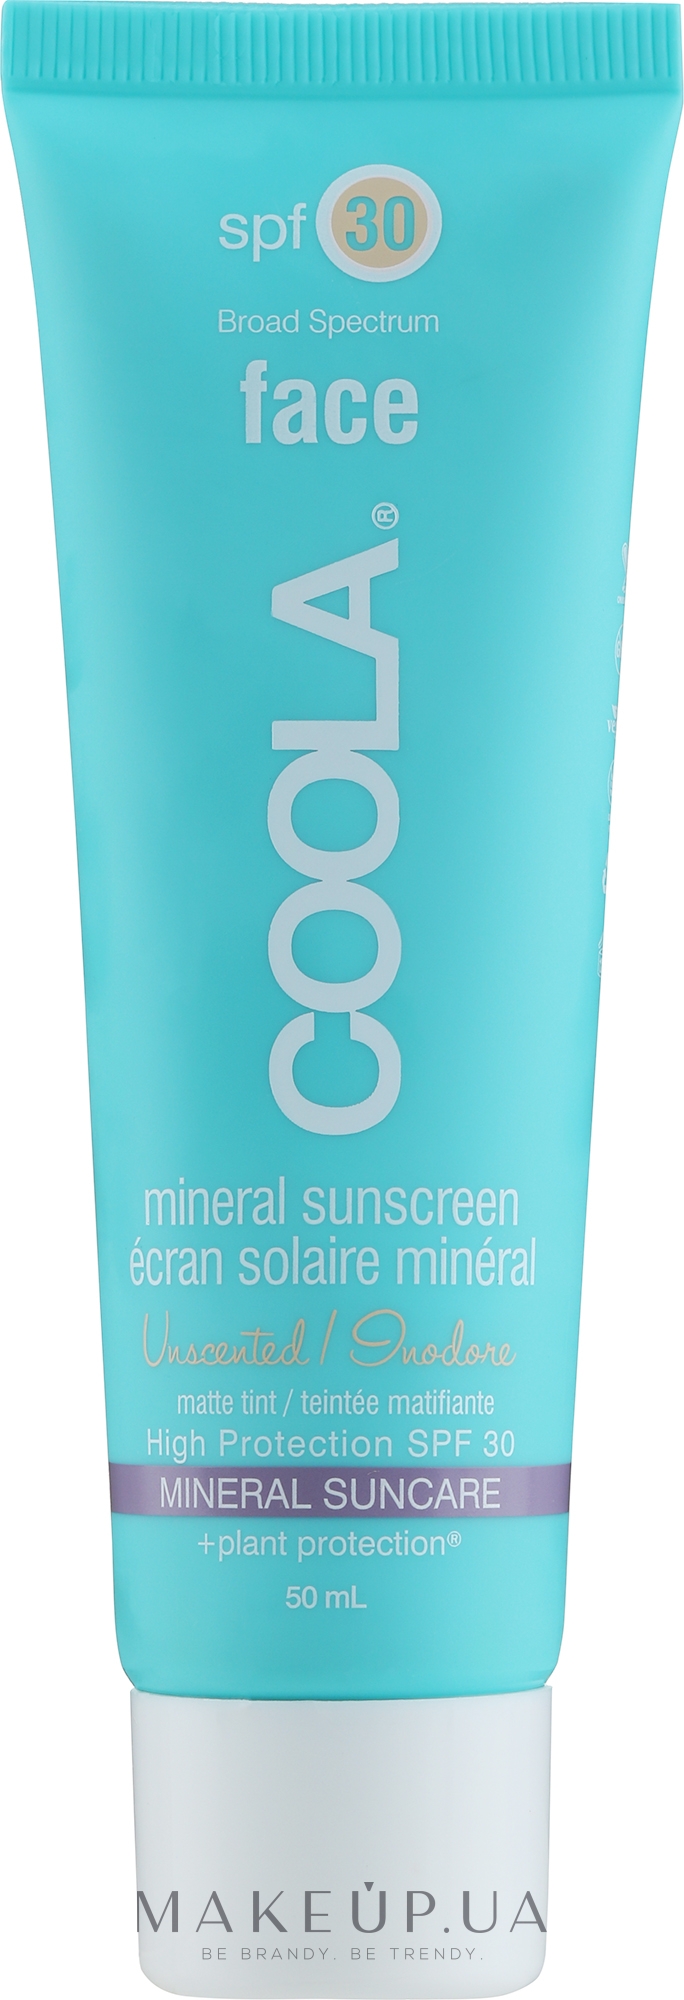 Mineral Face SPF 30 Matte Tint - Unscented